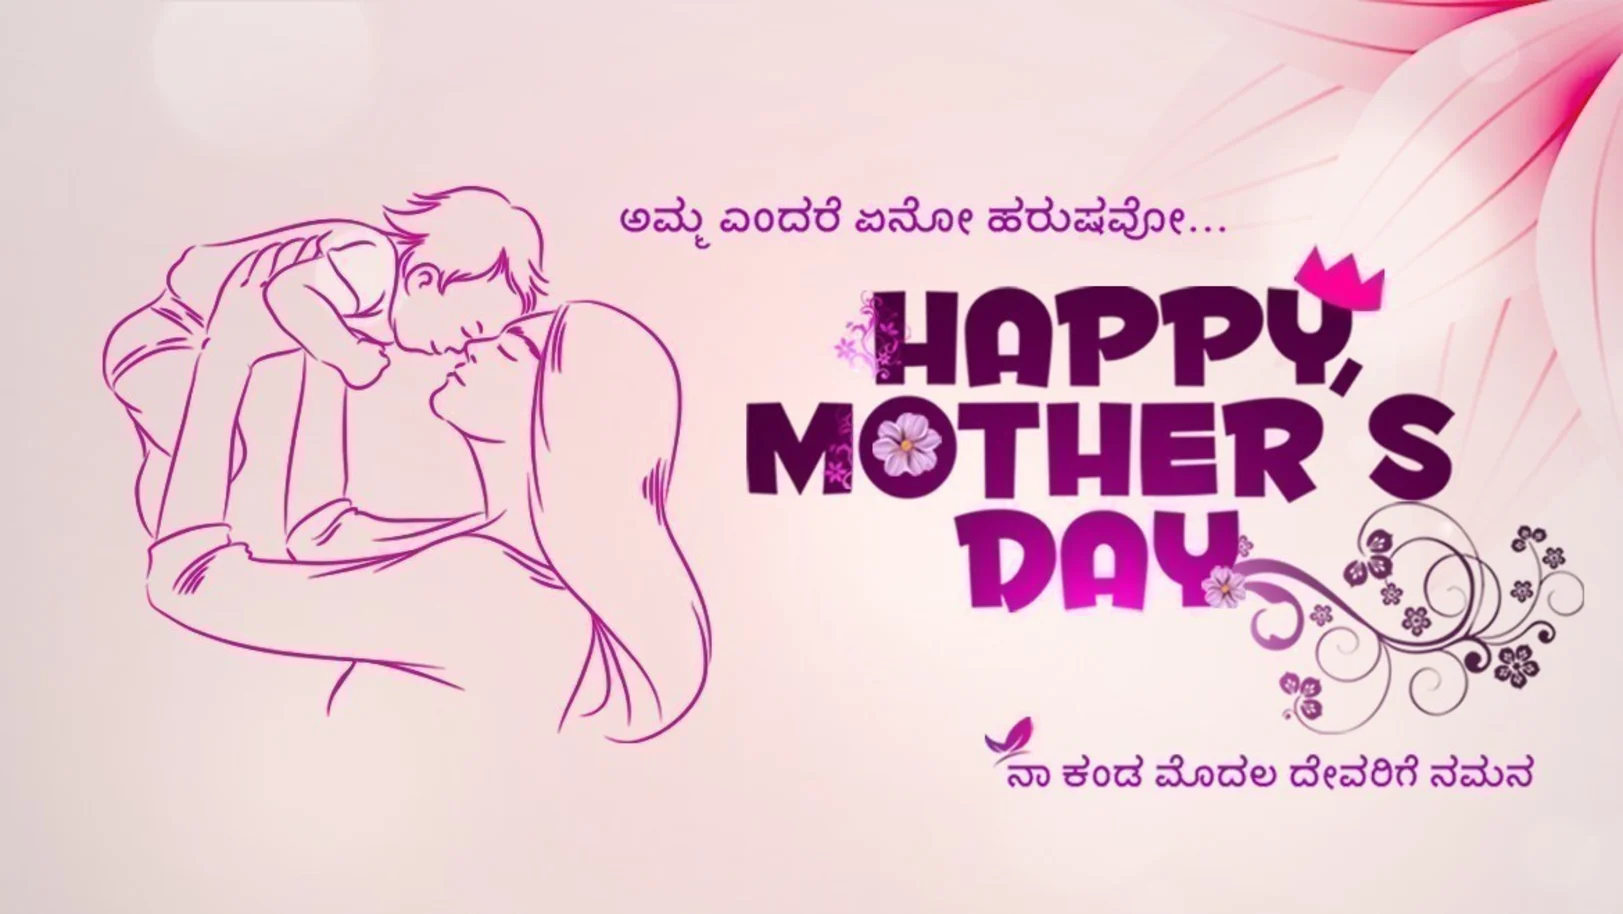 Happy Mother's Day 2019 - Malayalam TV Show